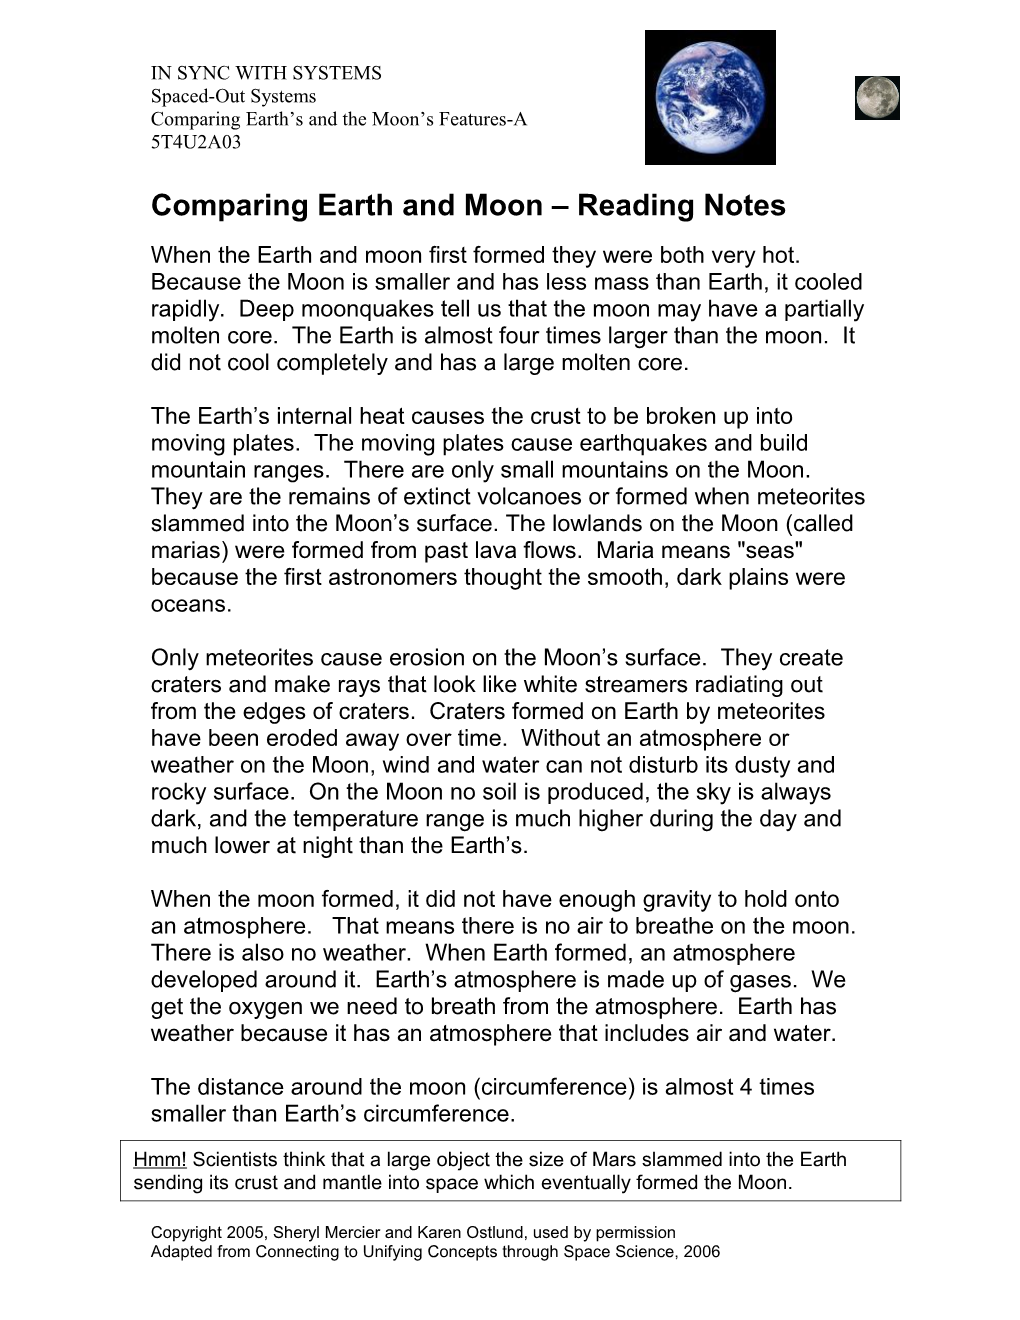 Comparing Earth and Moon Reading Notes